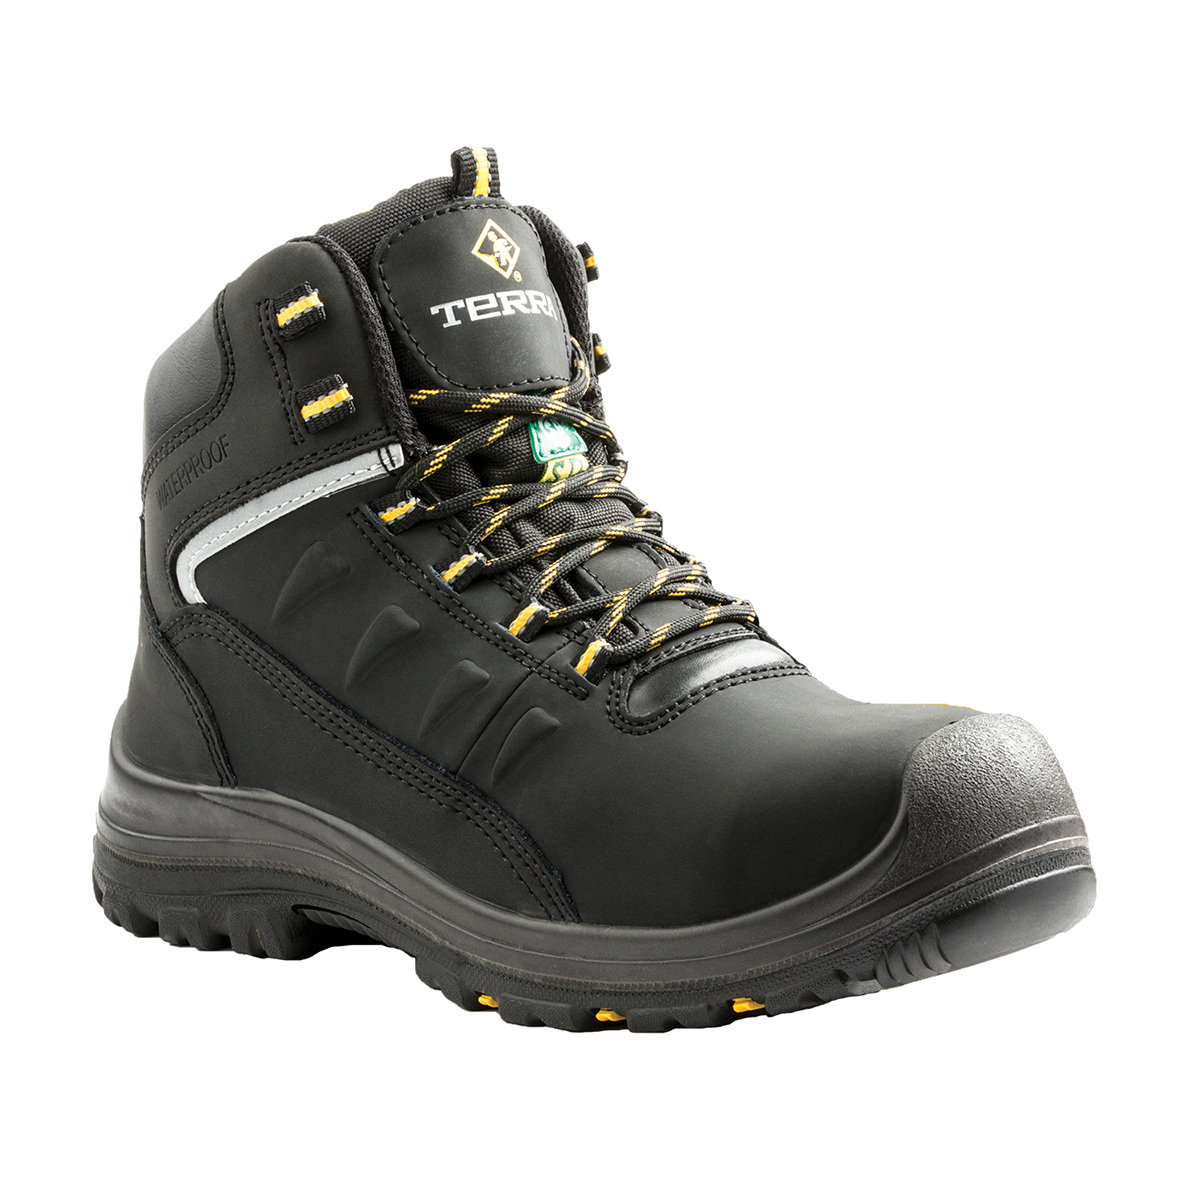 TERRA Size 14 Black Findlay Leather Composite Toe Safety Boots With High Traction, Slip Resistant Rubber Outsole